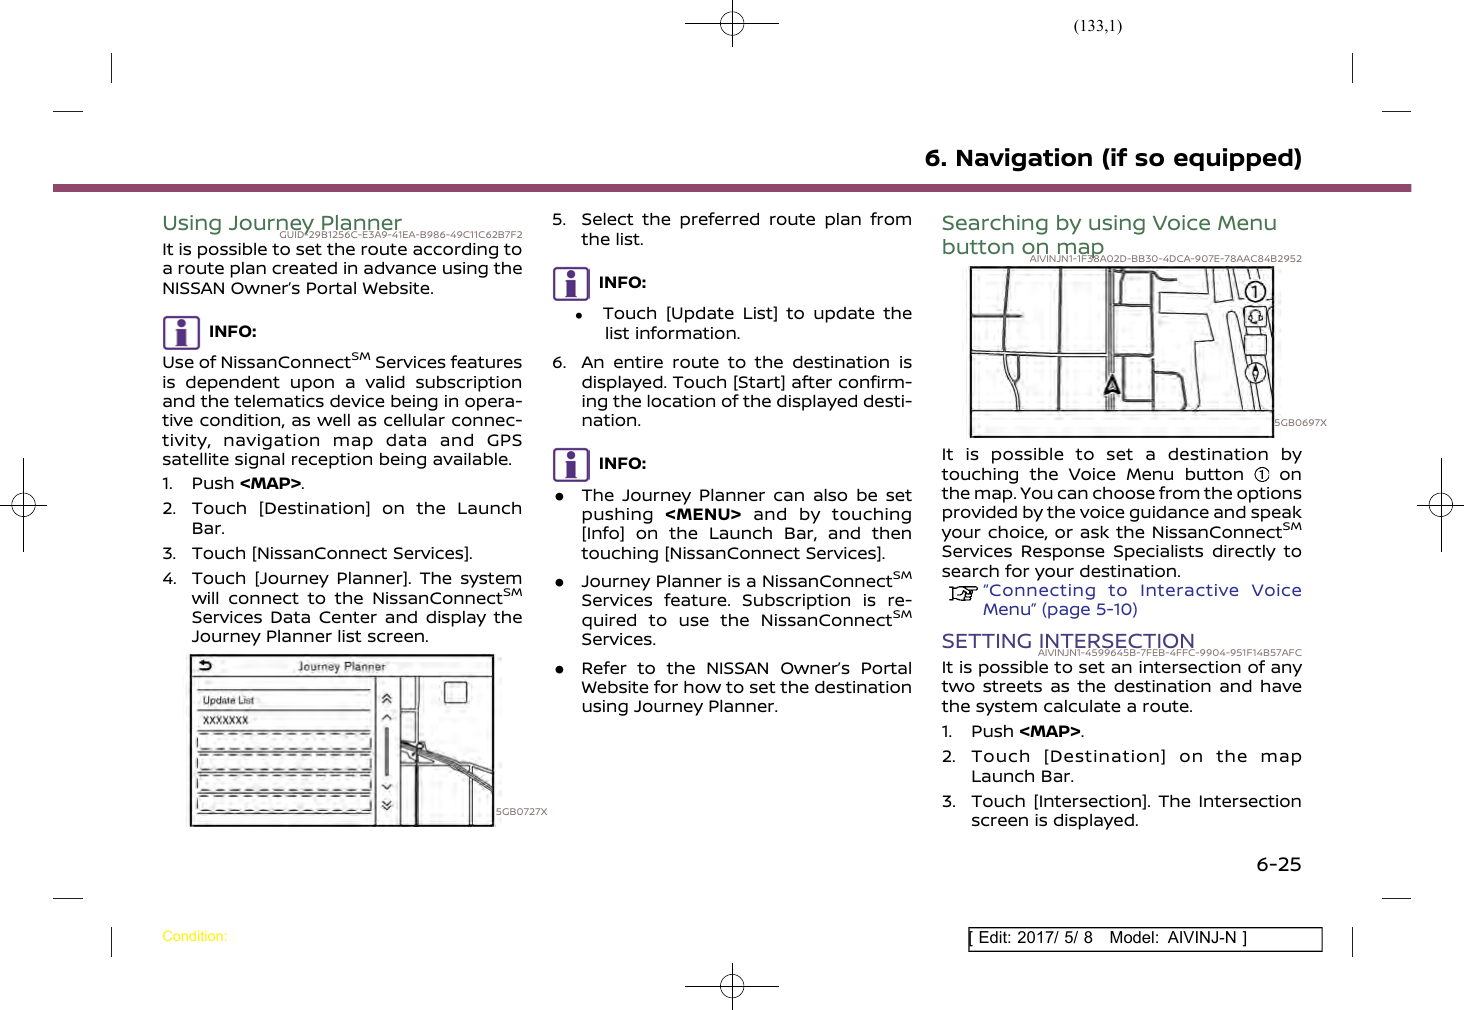 Page 133 of Robert Bosch Car Multimedia AIVICMFB0 Navigation System with Bluetooth and WLAN User Manual